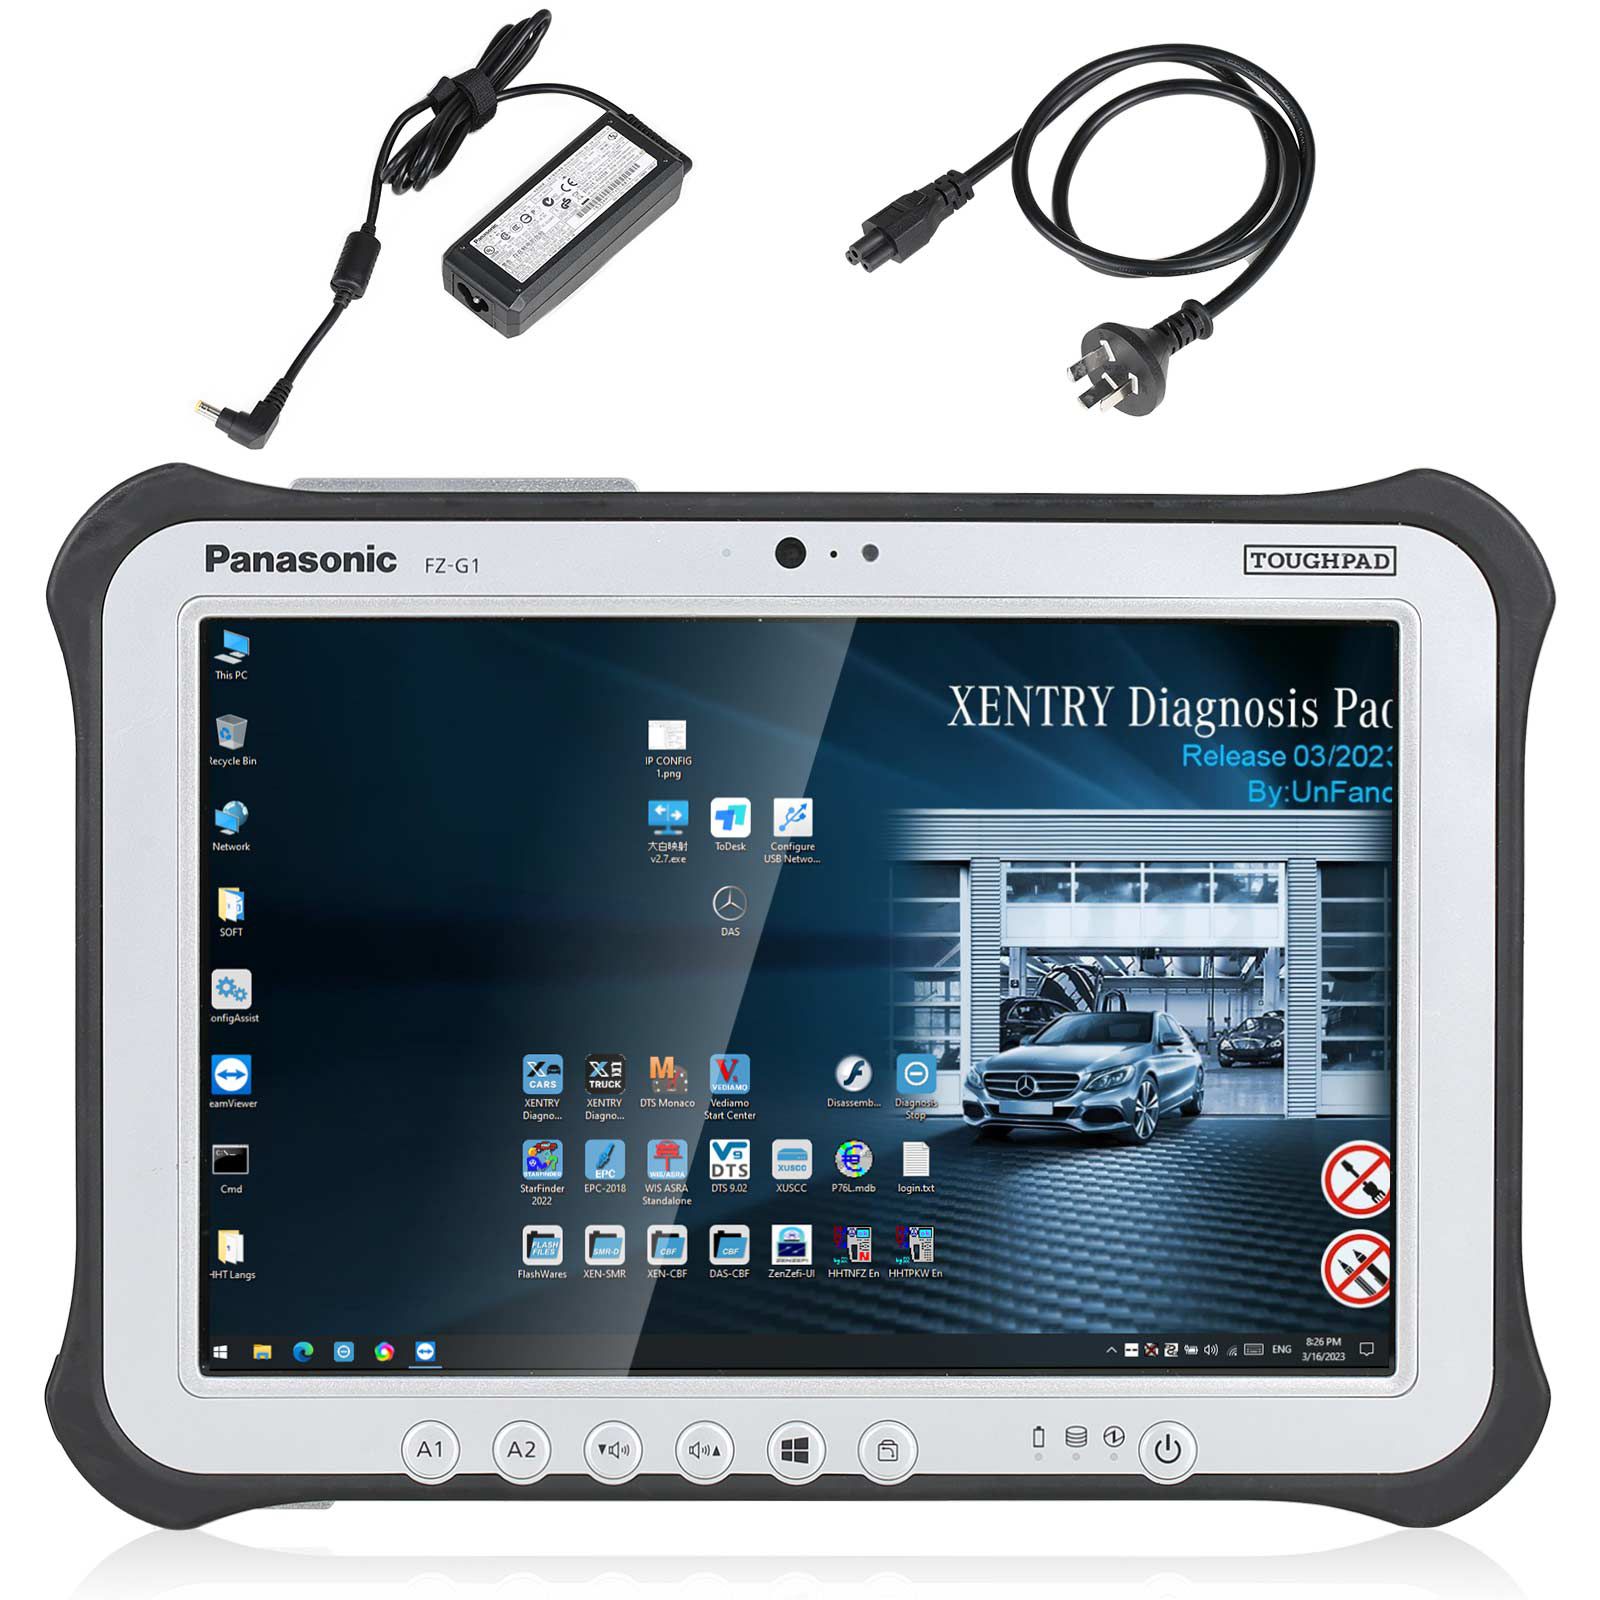 Super MB Pro M6+ Full Version DoIP Benz With 1TB HDD for BENZ Xentry and BMW ISTA-D ISTA-P Software Plus Panasonic FZ-G1 I5 Tablet Ready to Use